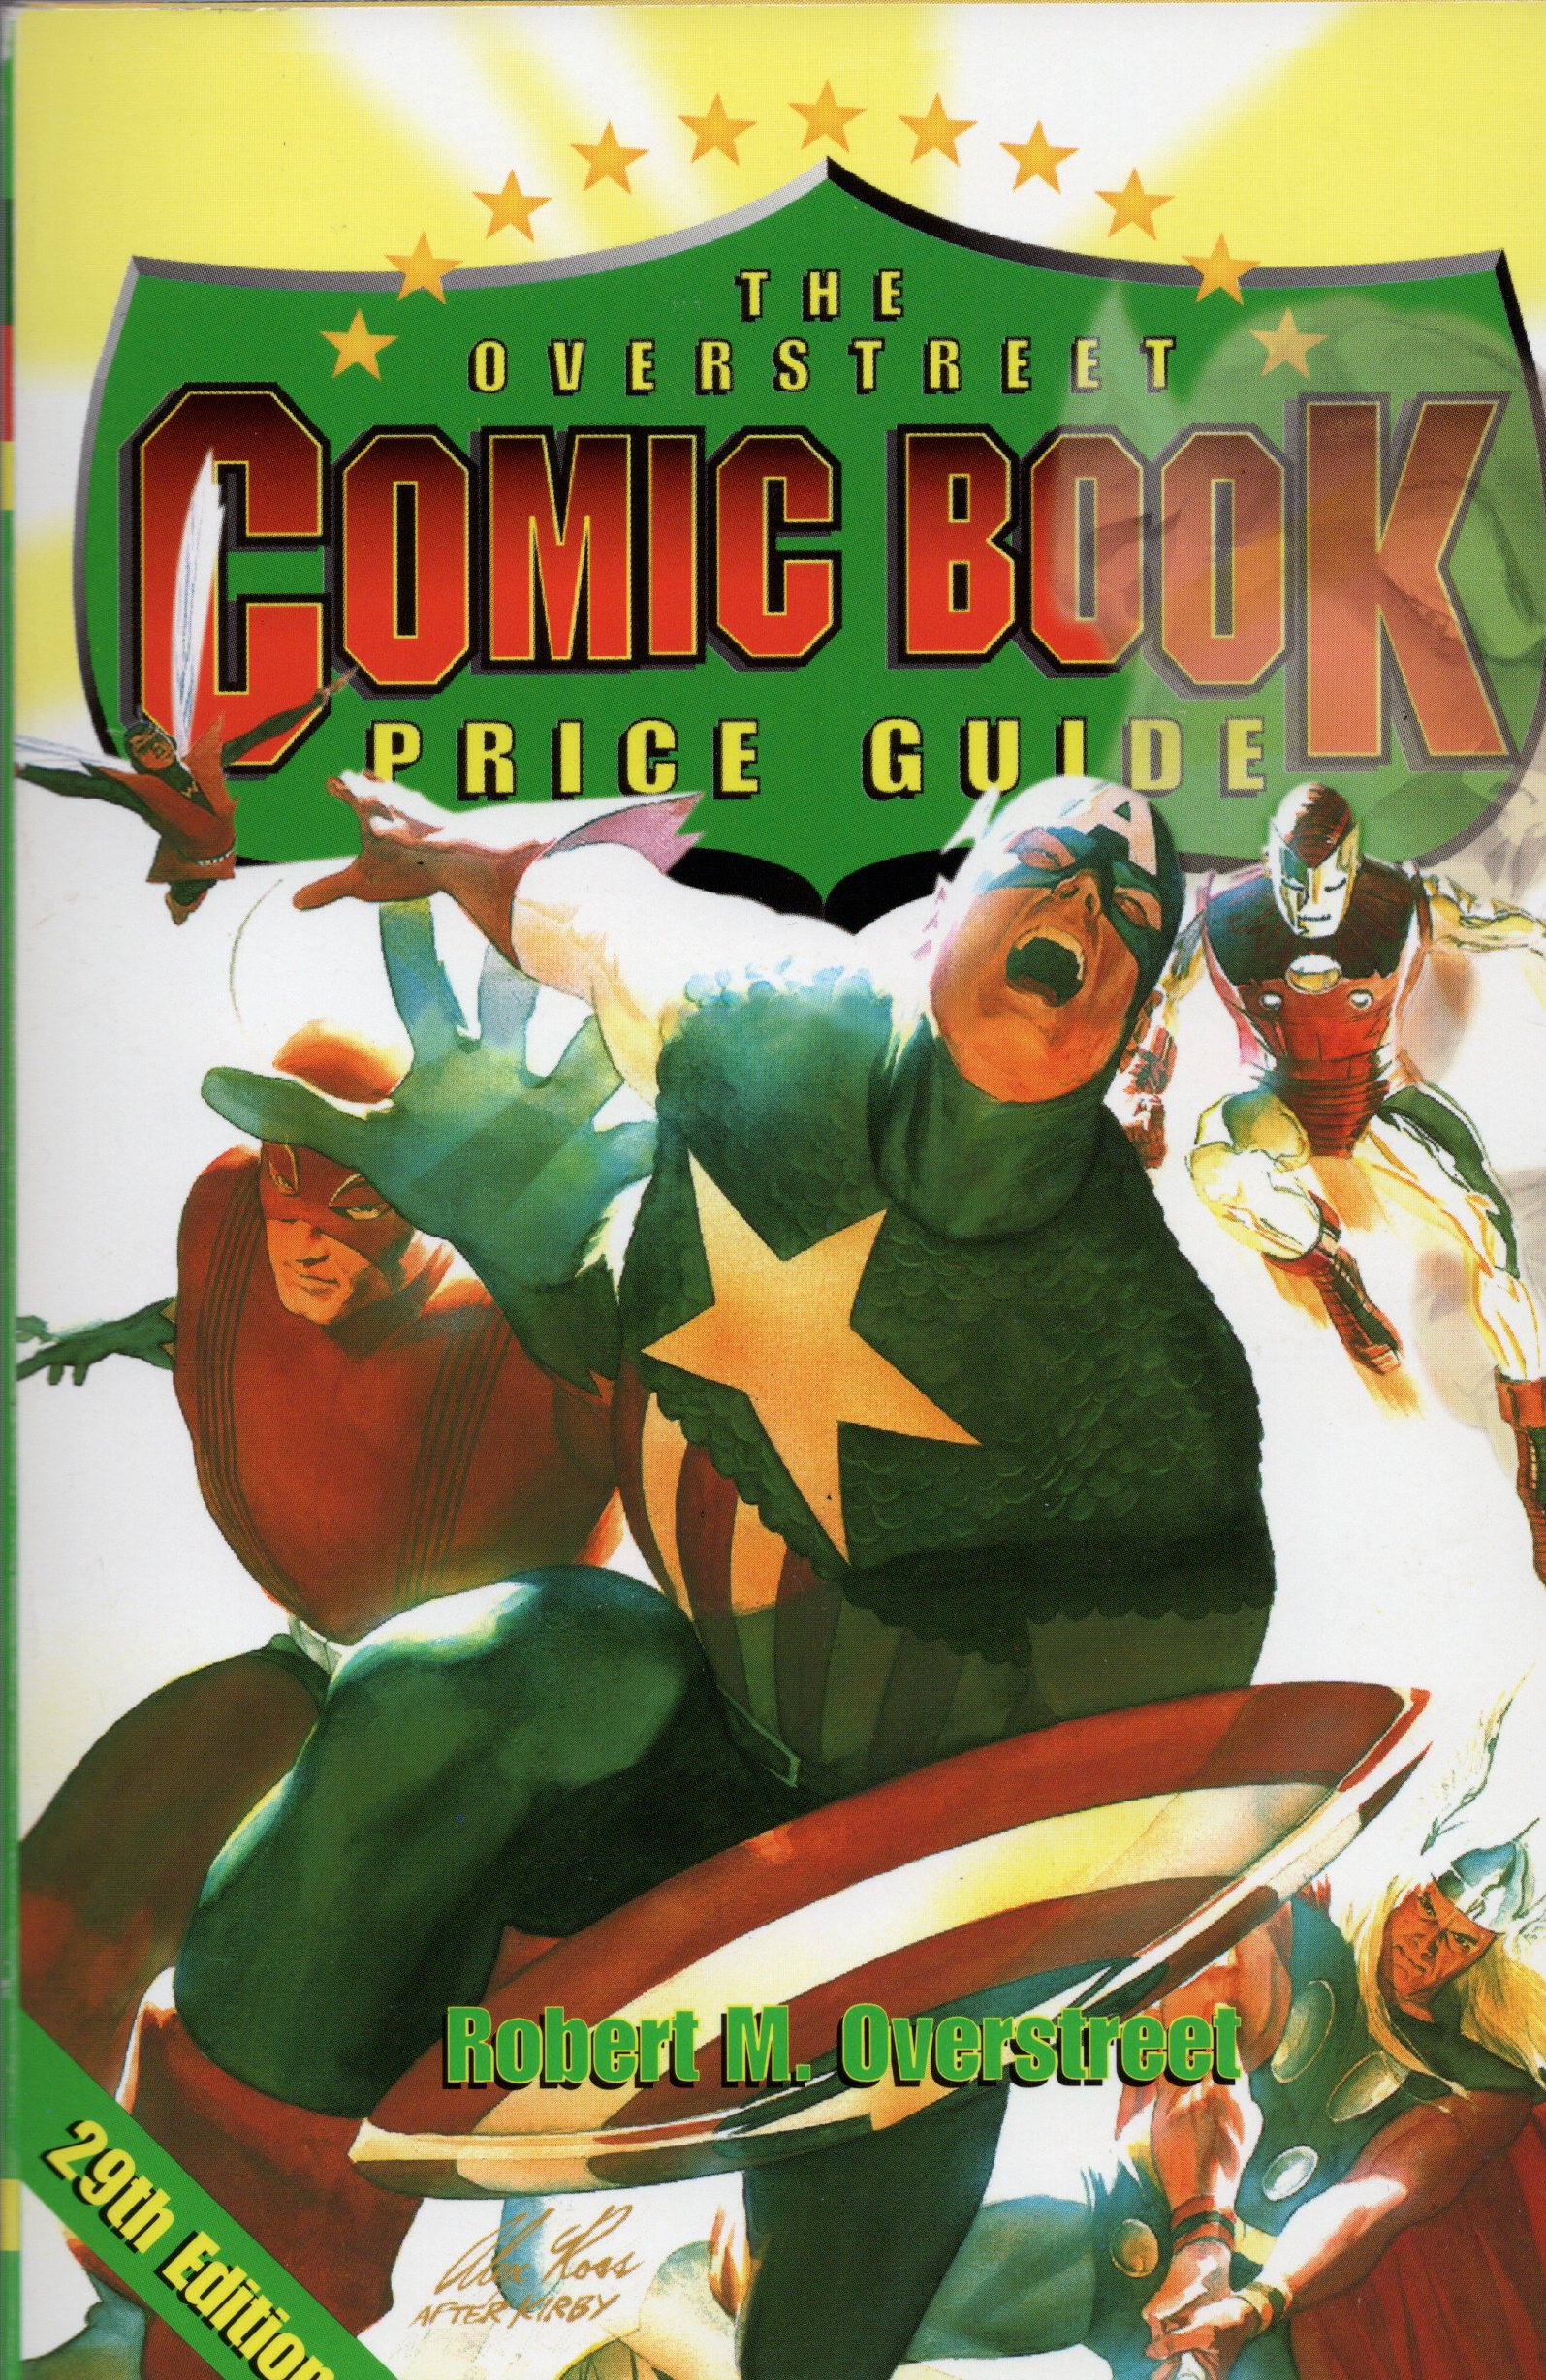 The Overstreet Comic Book Price Guide (29th Edition, 1999)